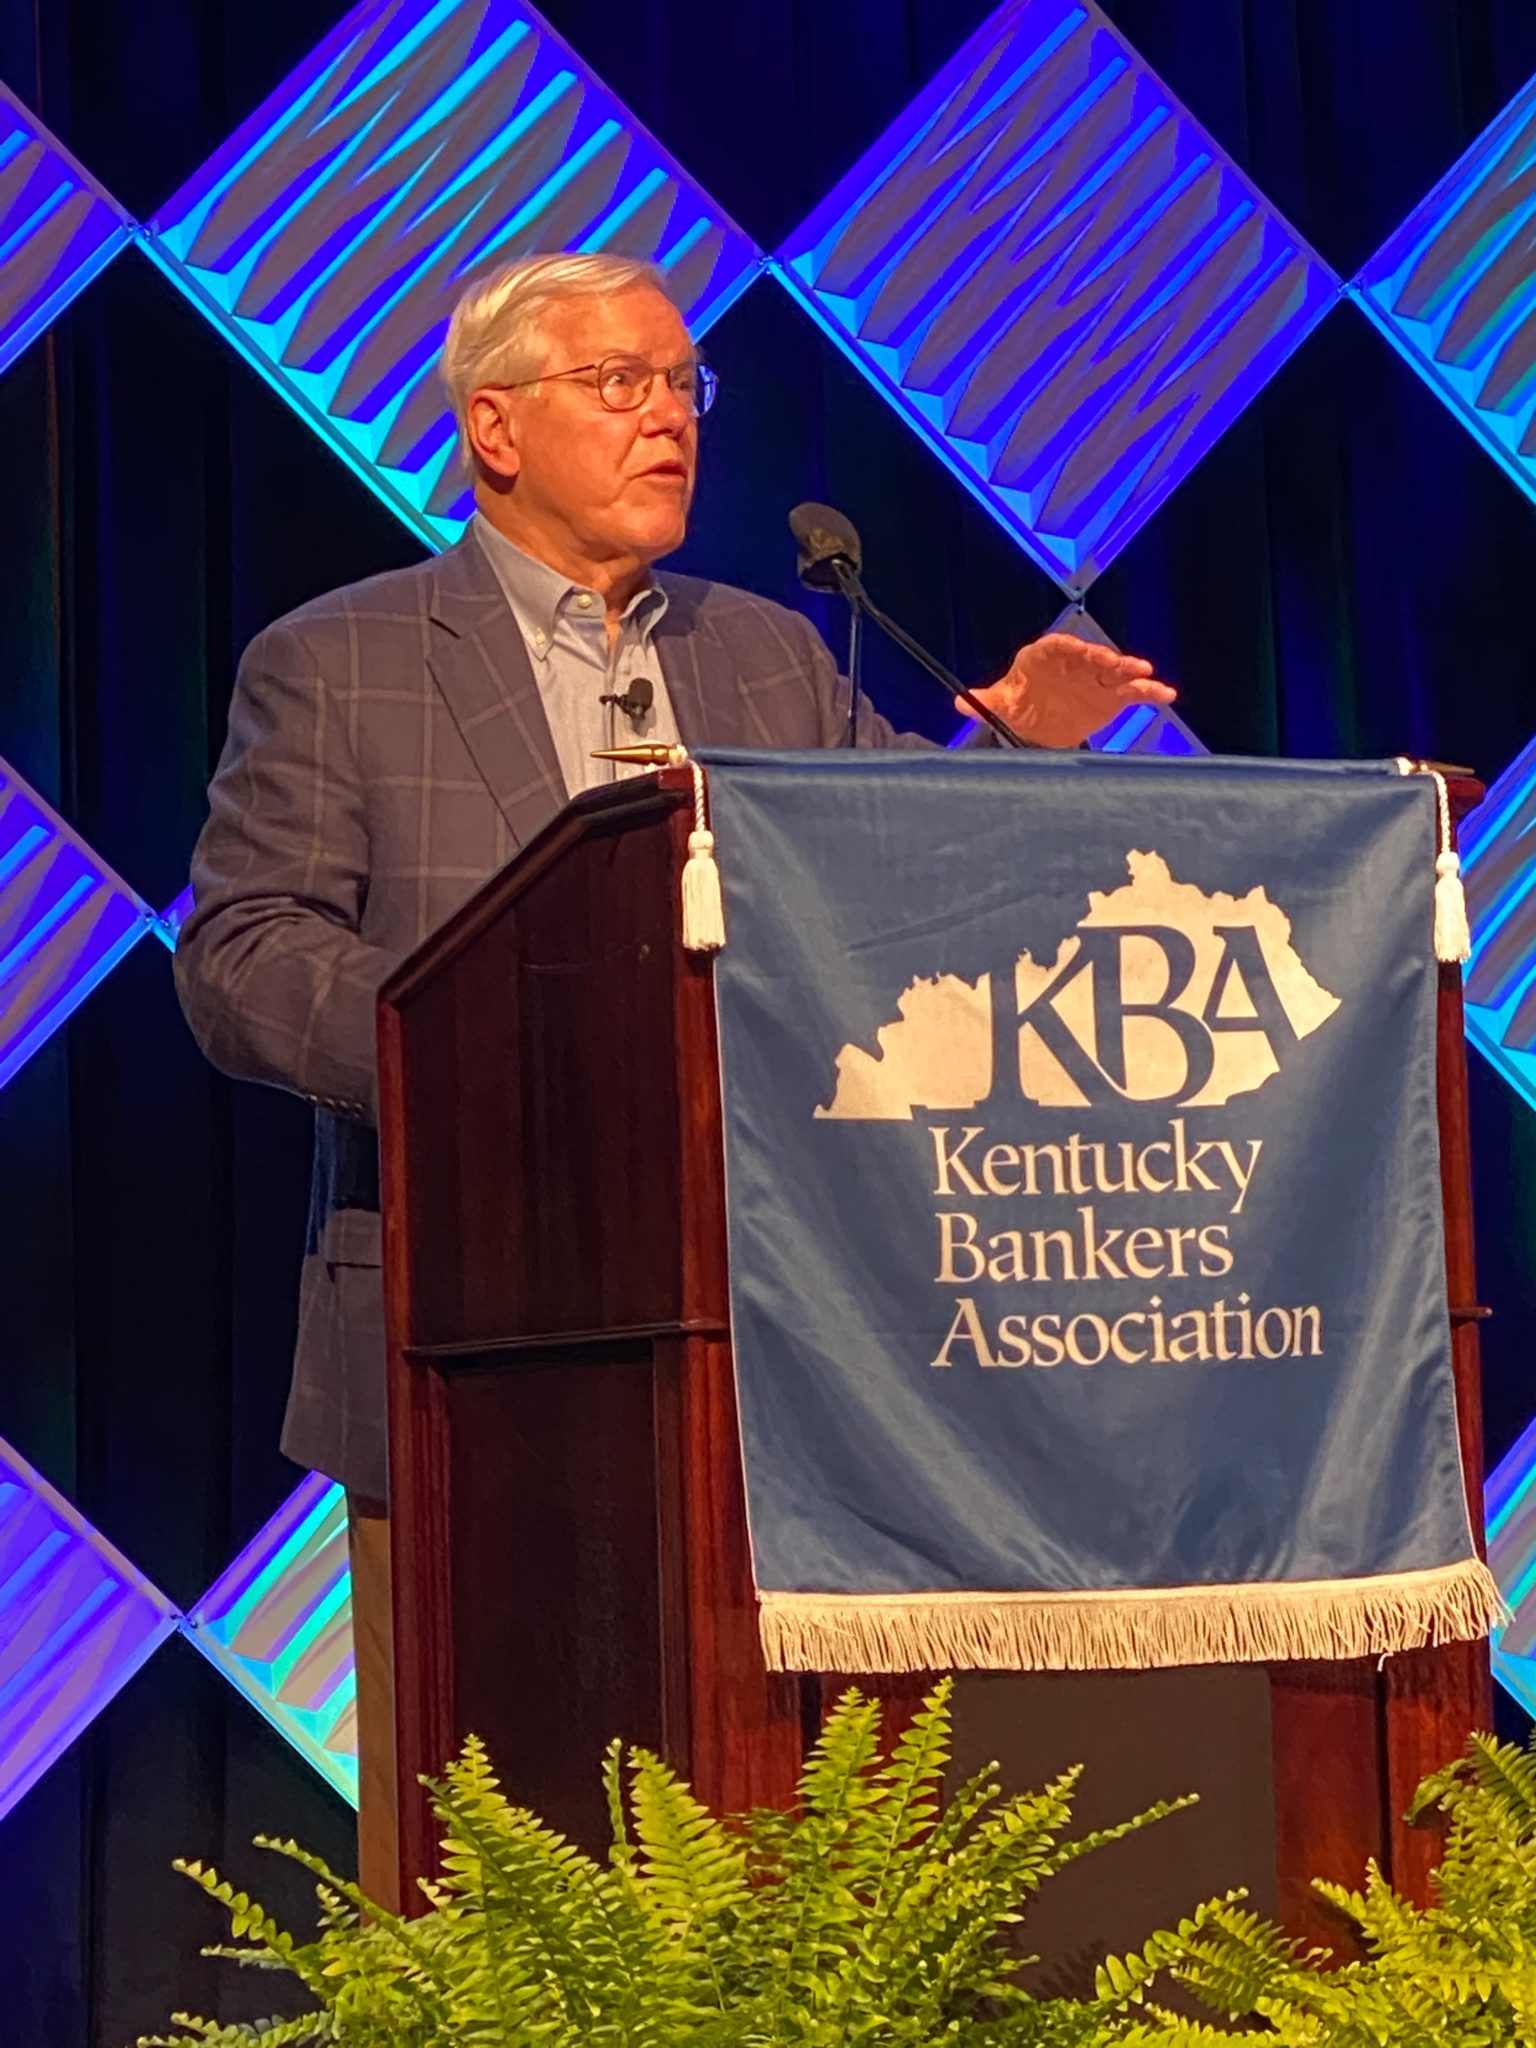 MPM Sponsors Kentucky Bankers Association Annual Convention